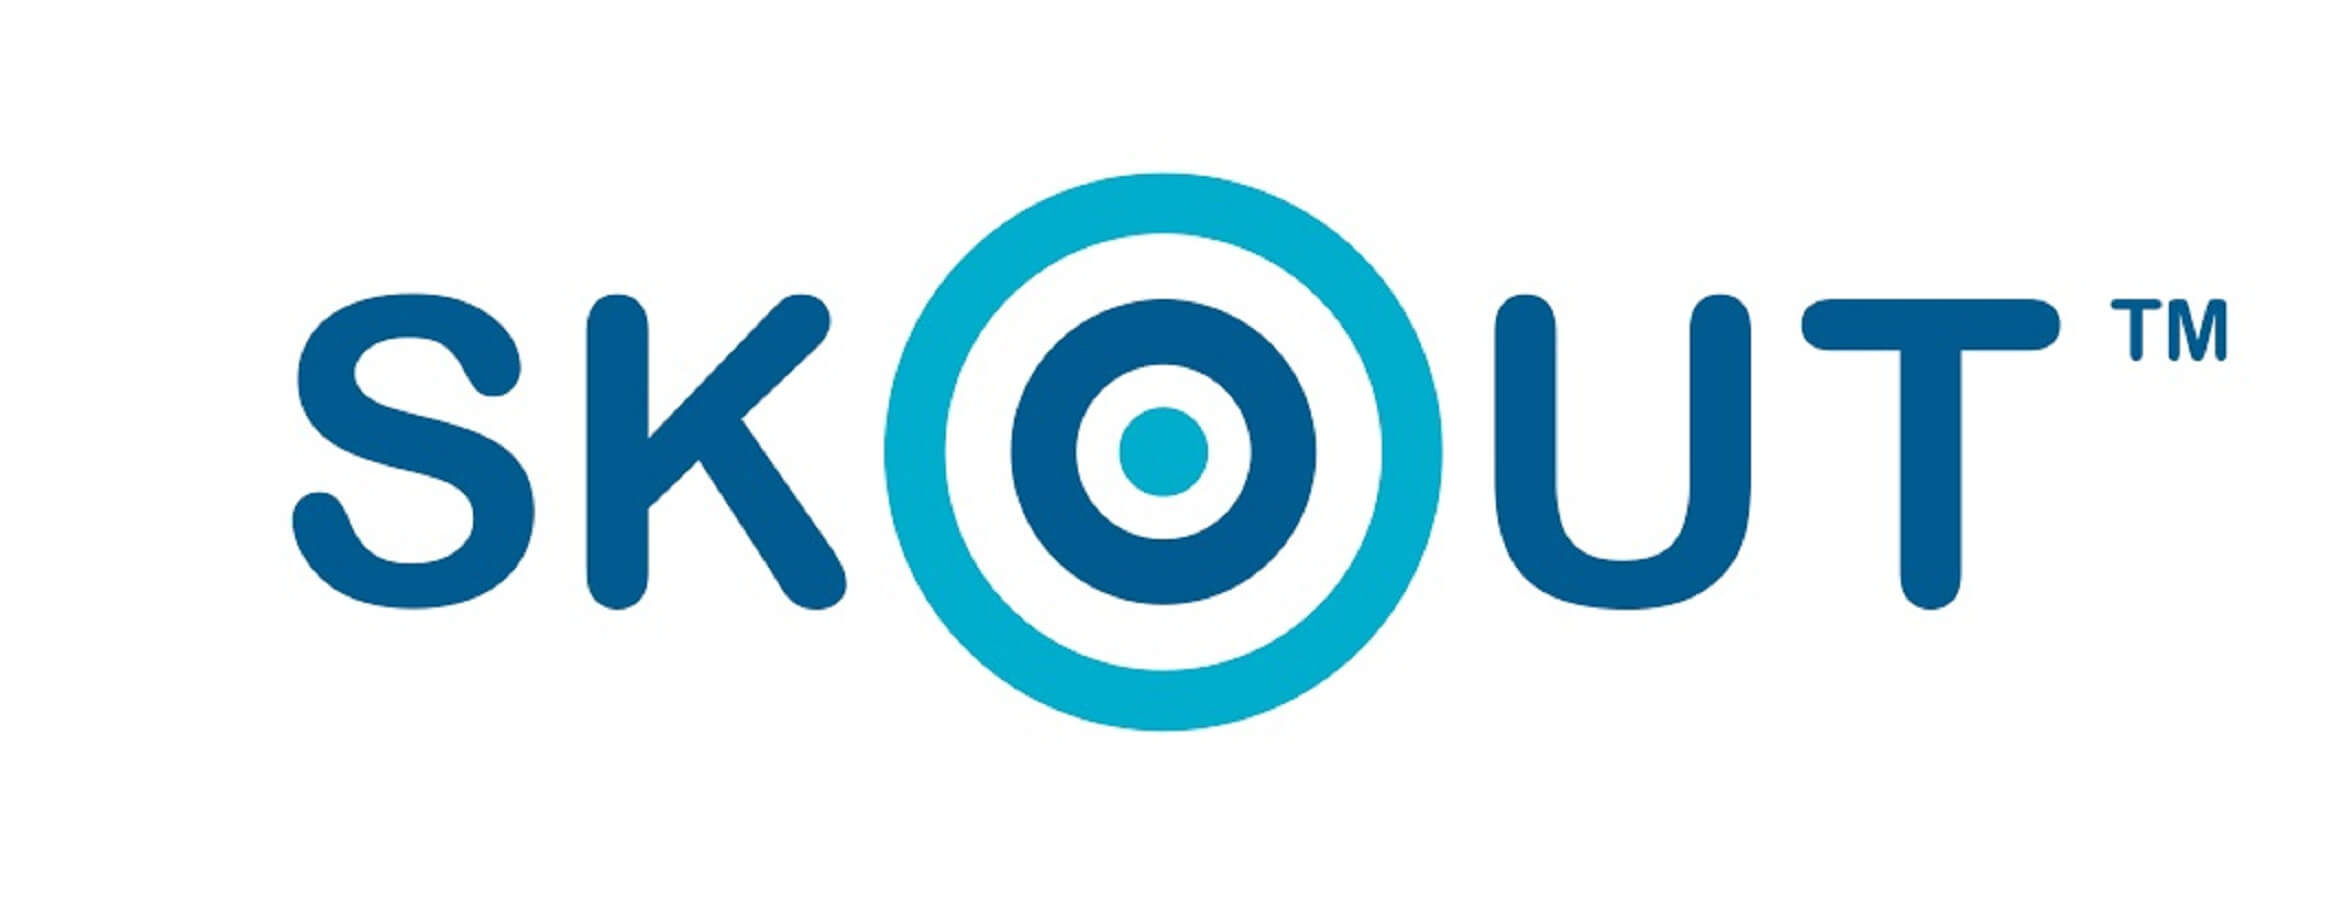 How to delete skout account